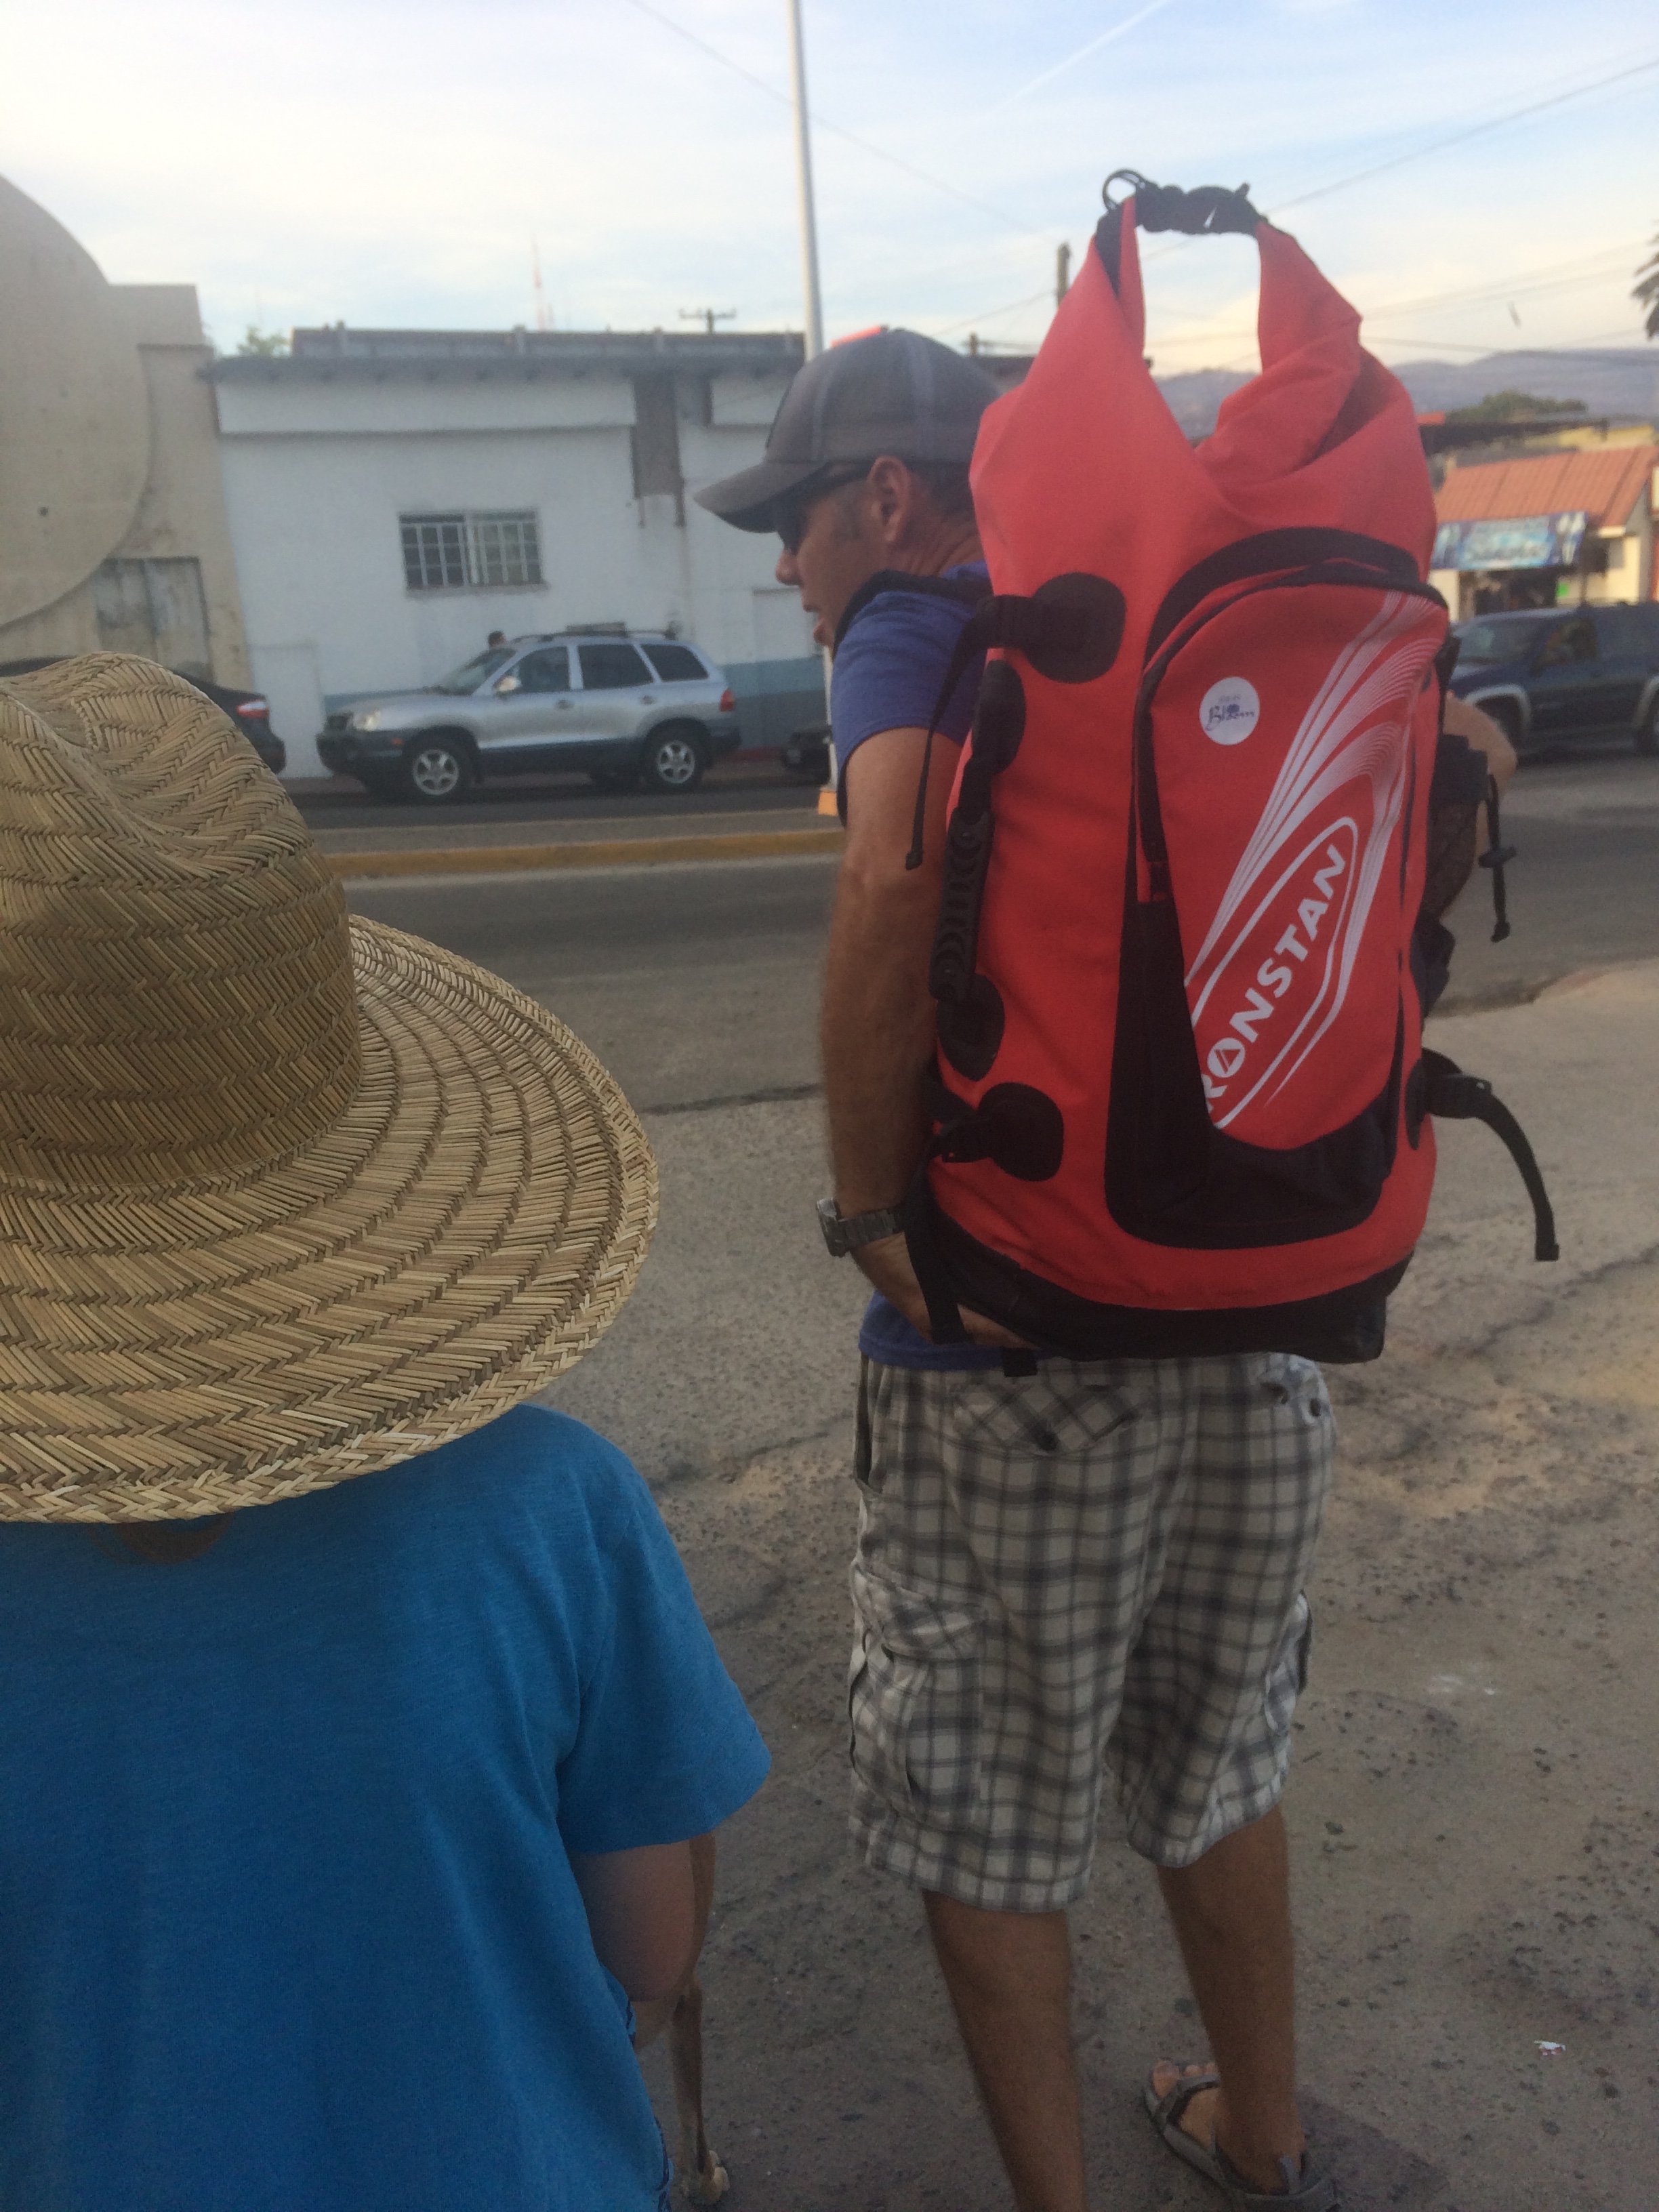 Walking the laundry to the laundromat. $110 pesos for a full service load- wash, dry and fold! AWESOME.